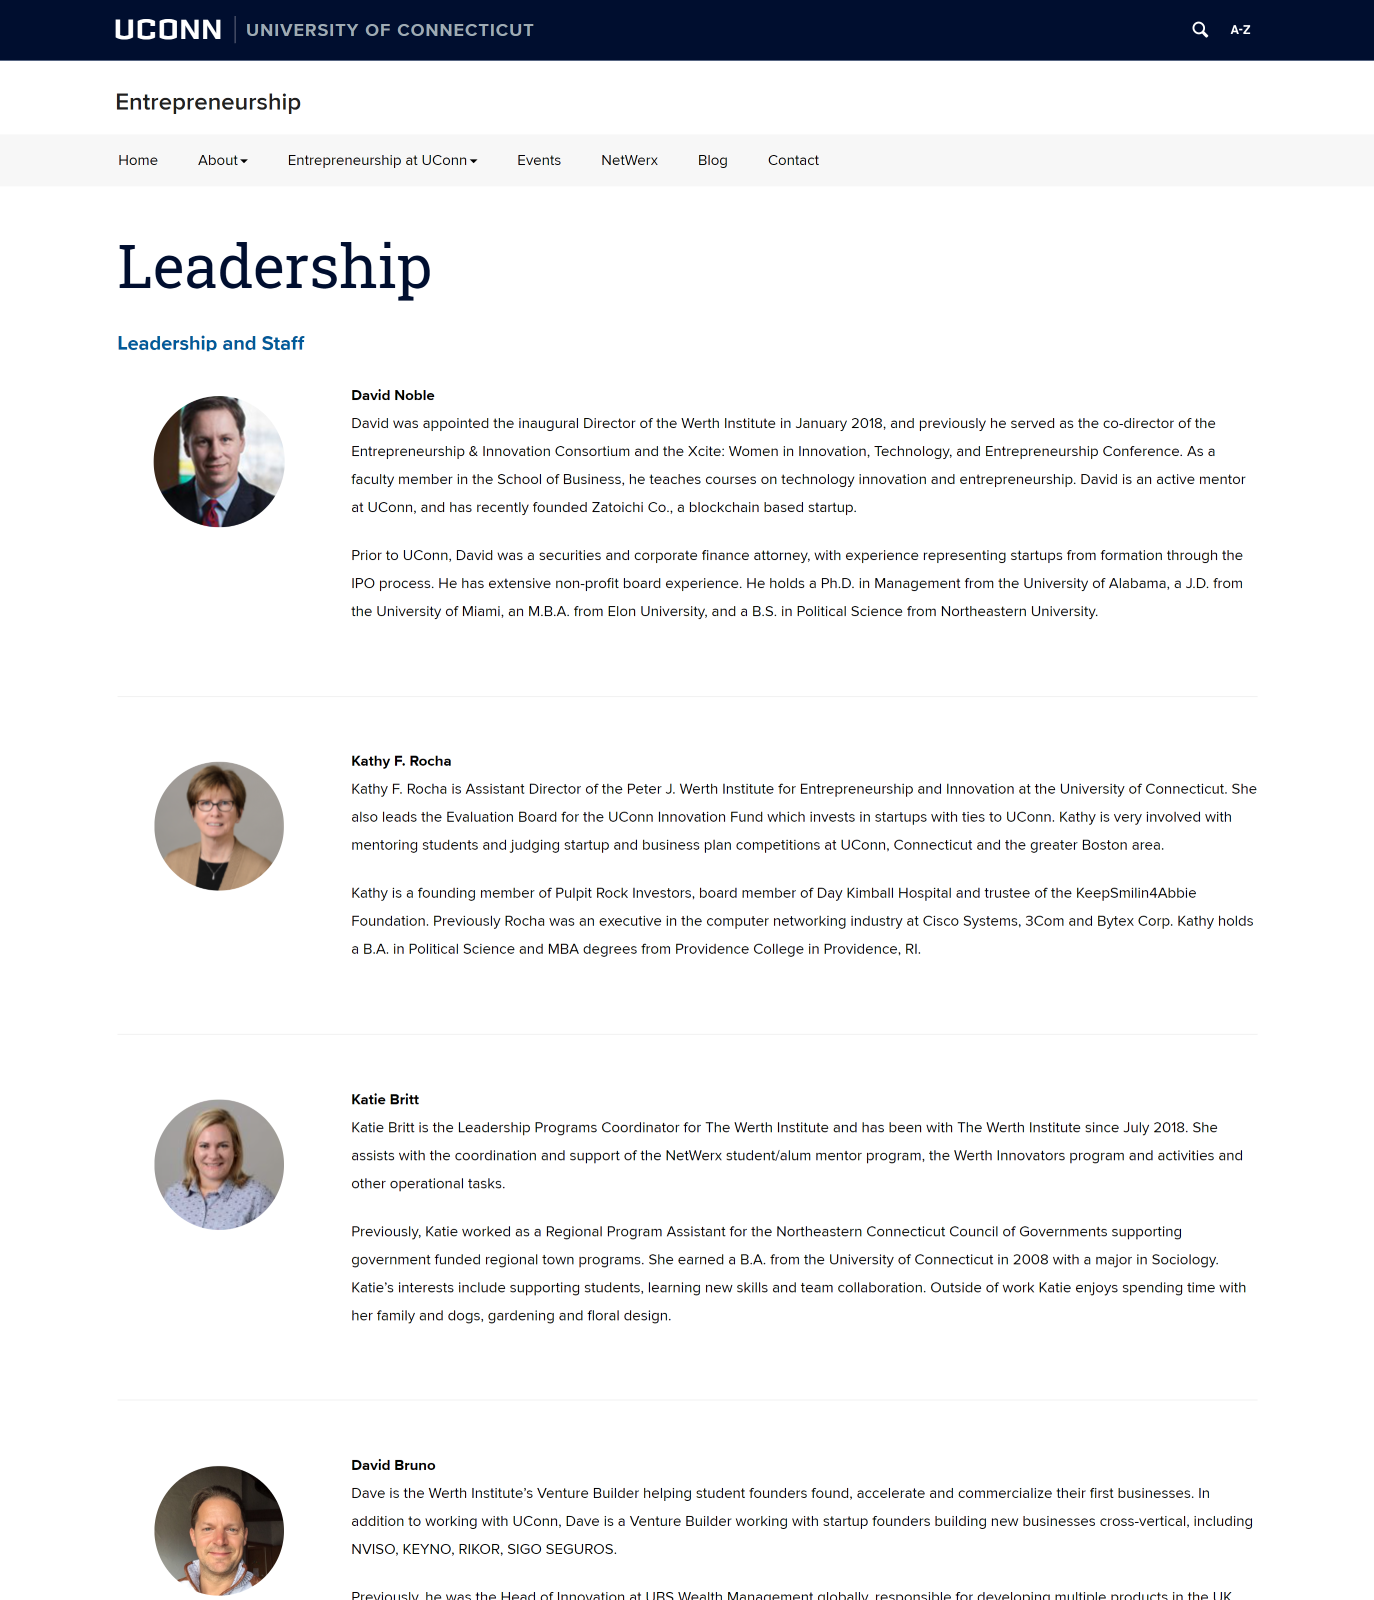 Screenshot of an interior page of the Entrepreneurship website